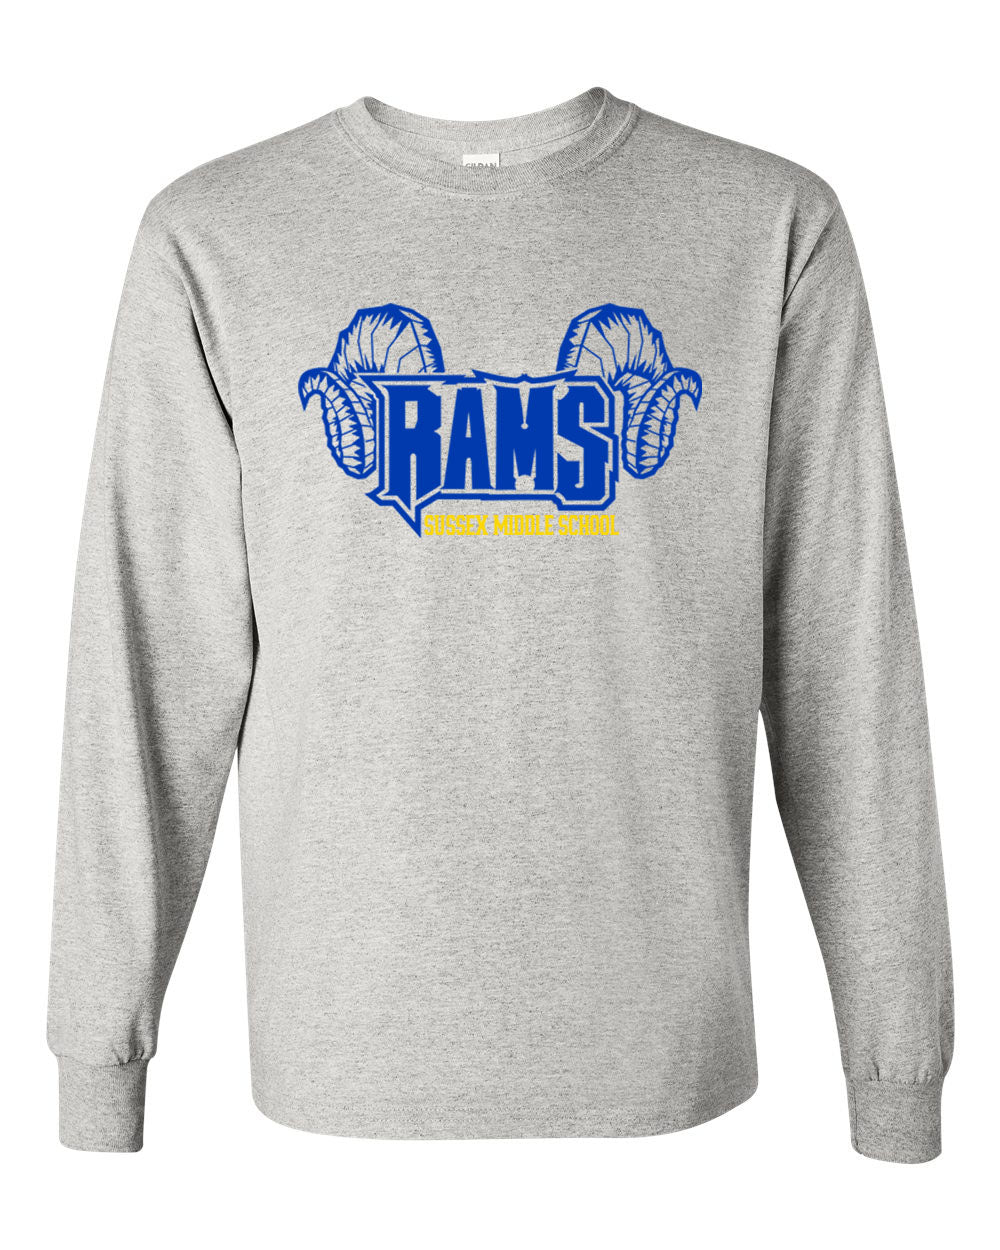 Sussex Middle Design 1 Long Sleeve Shirt